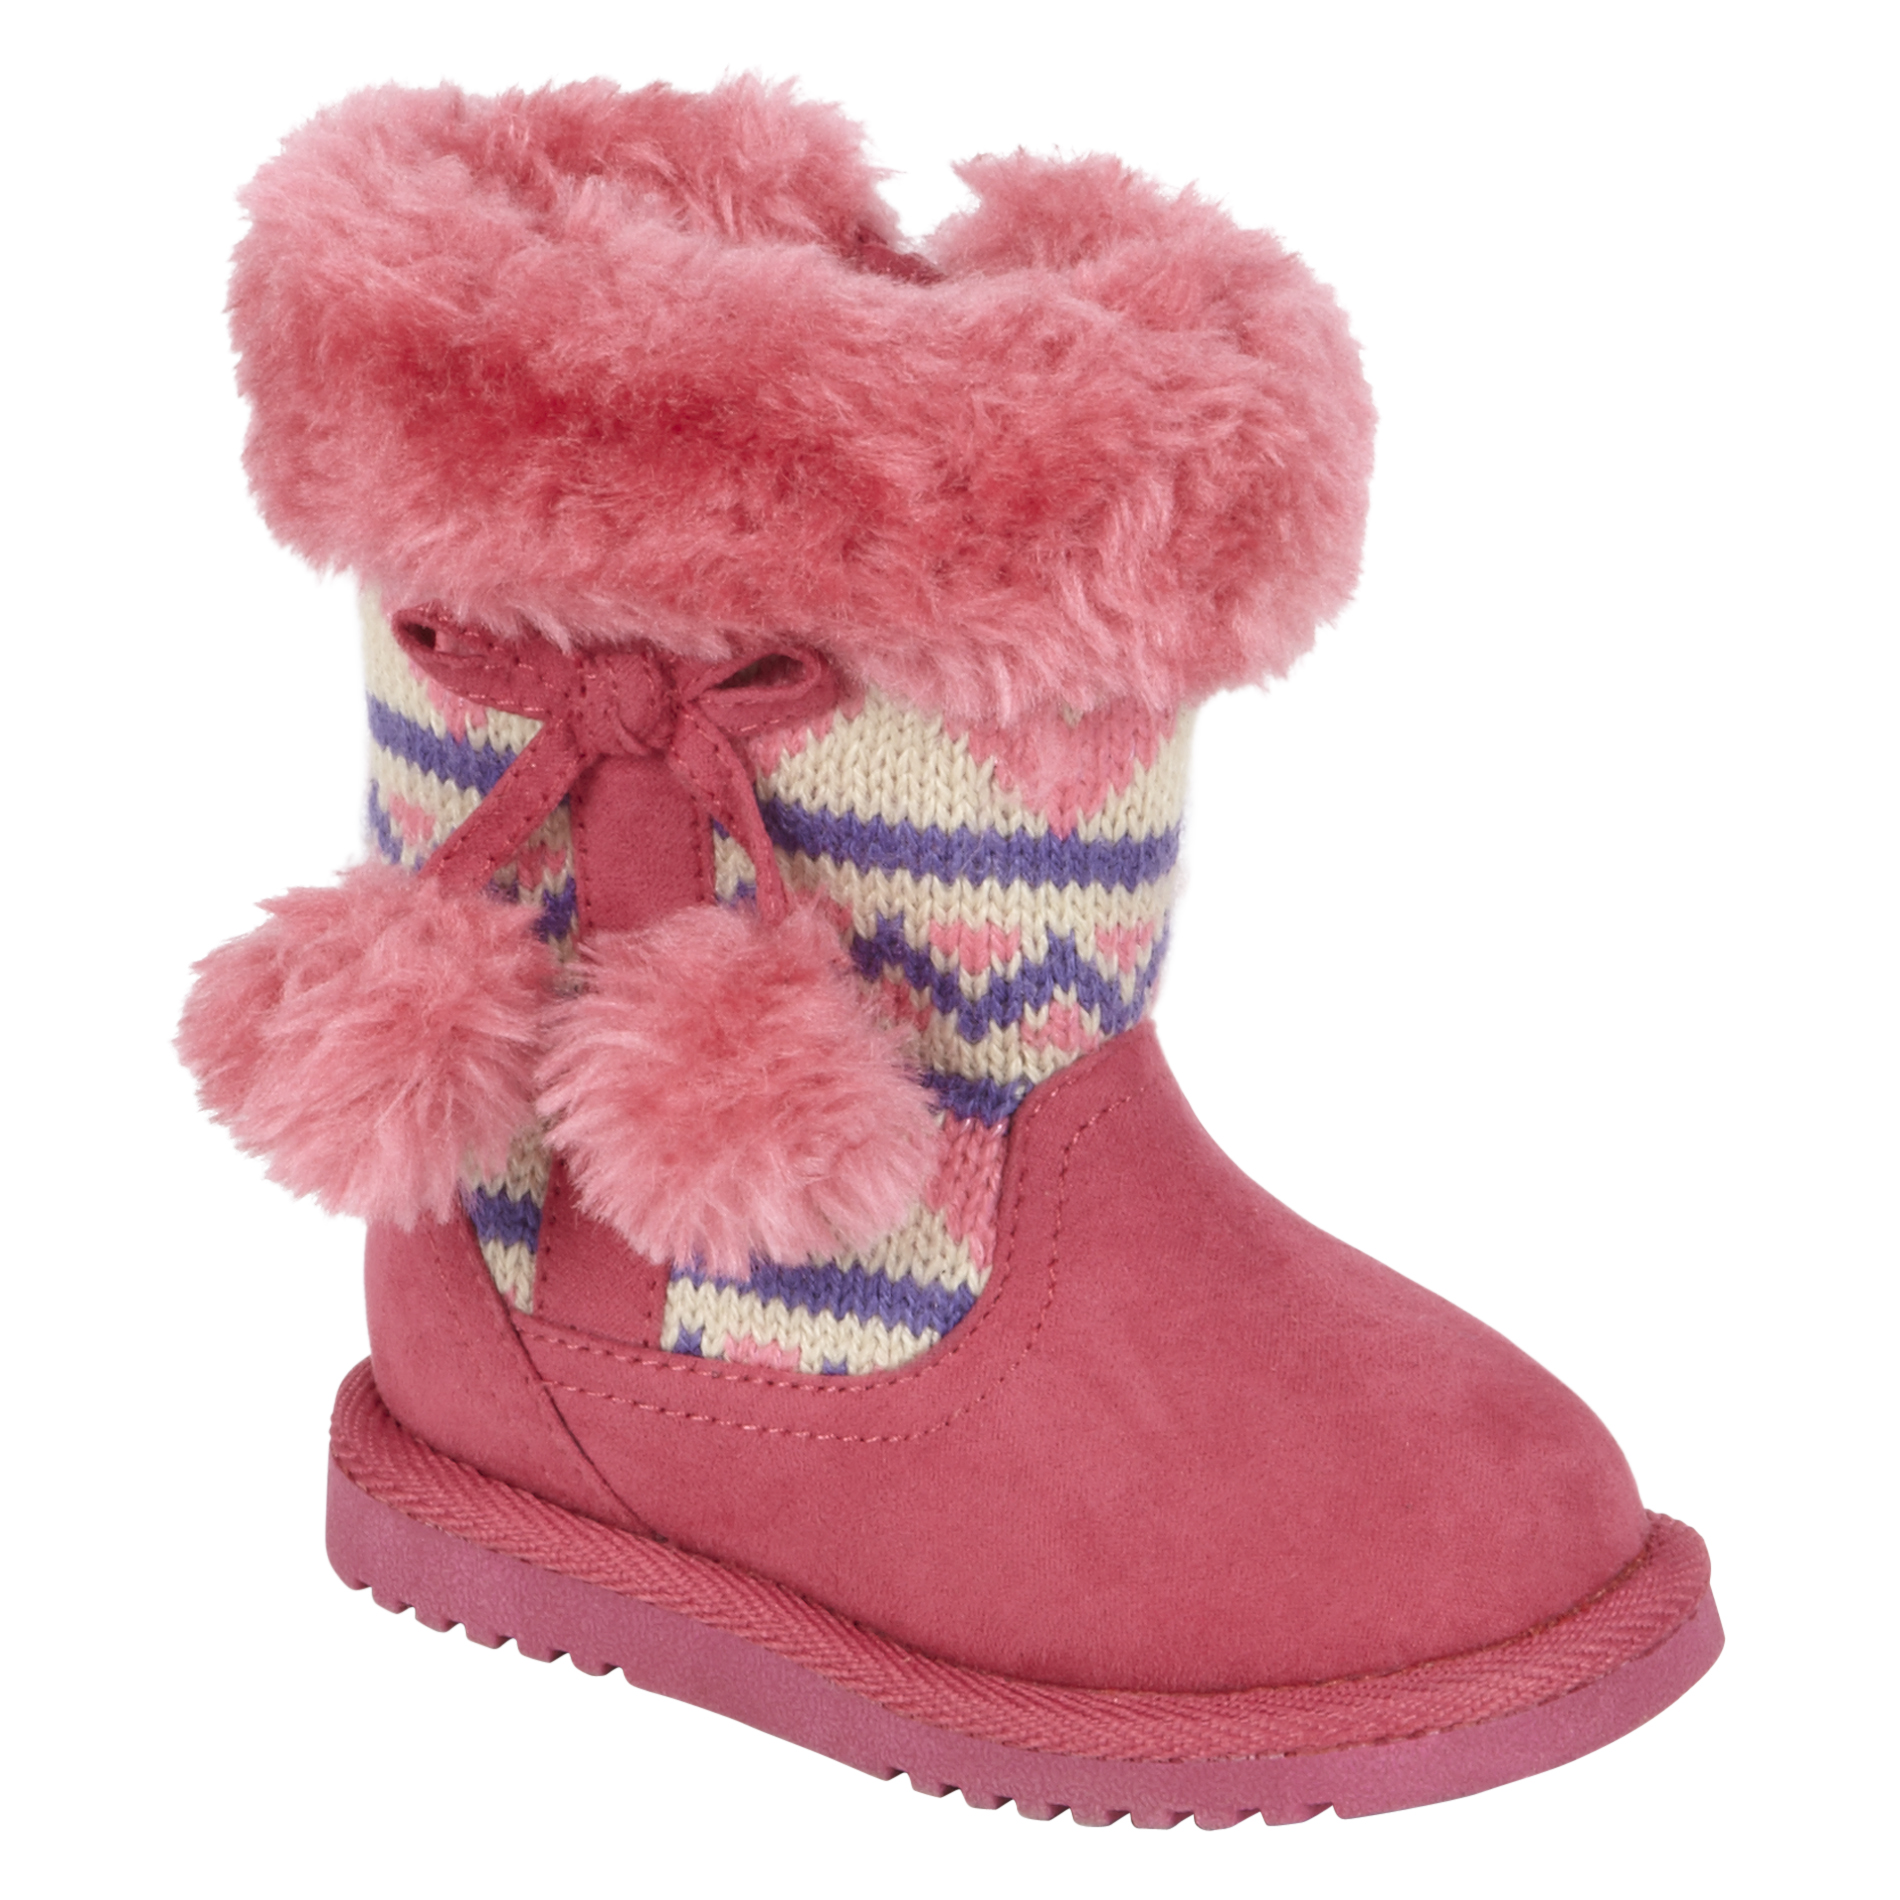 Canyon River Blues Baby Girl's Boot Annette - Fuchsia